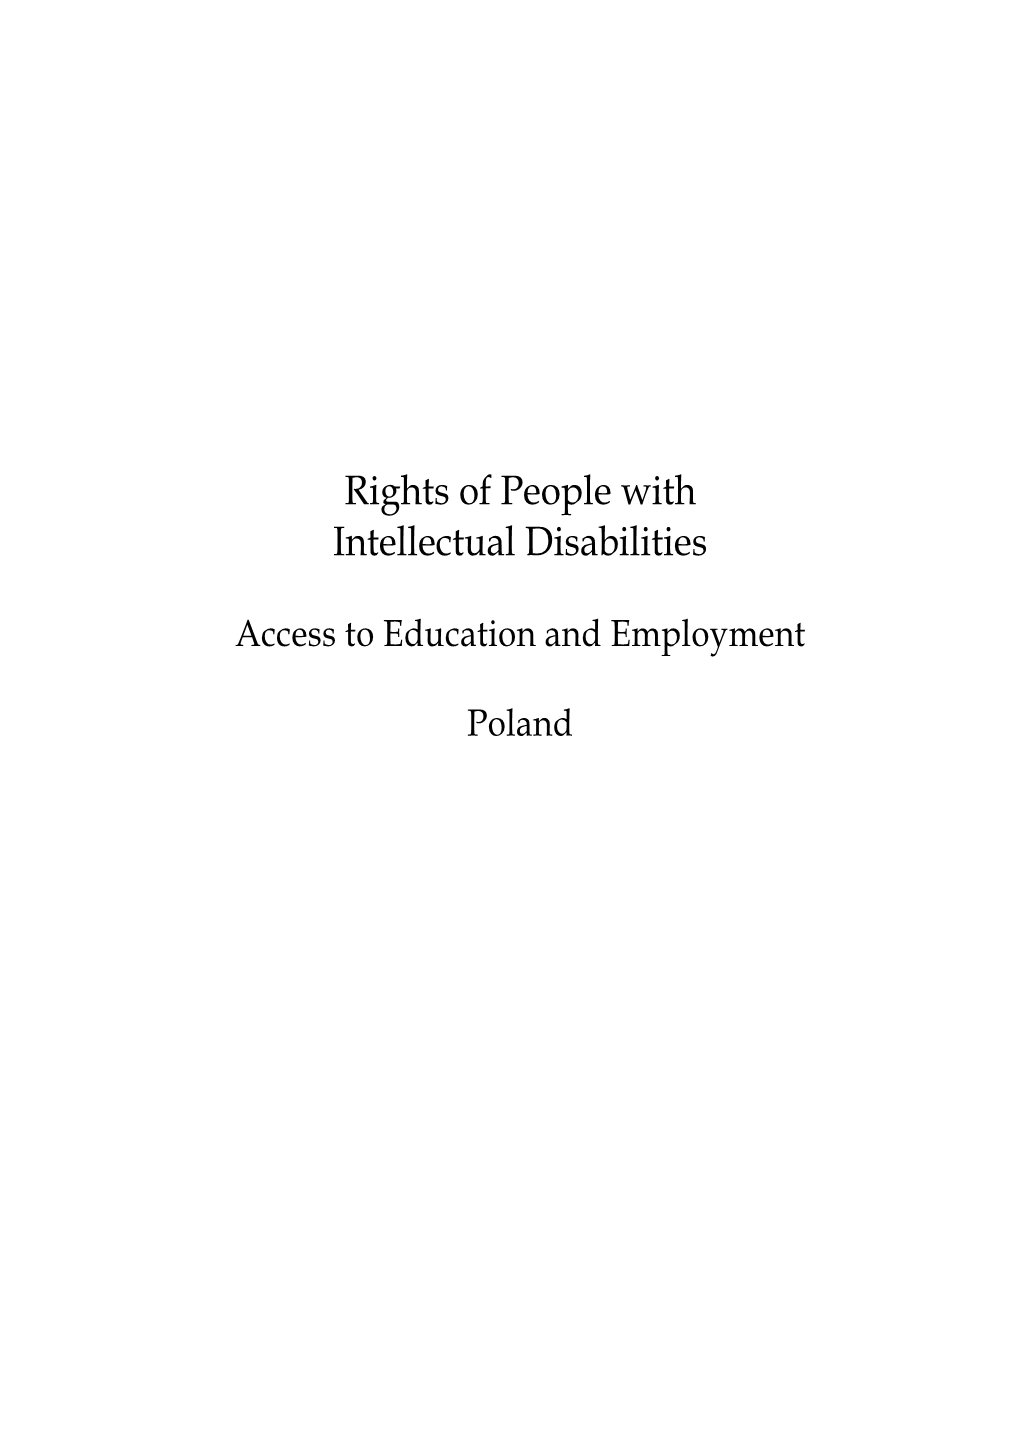 Rights of People with Intellectual Disabilities in Poland